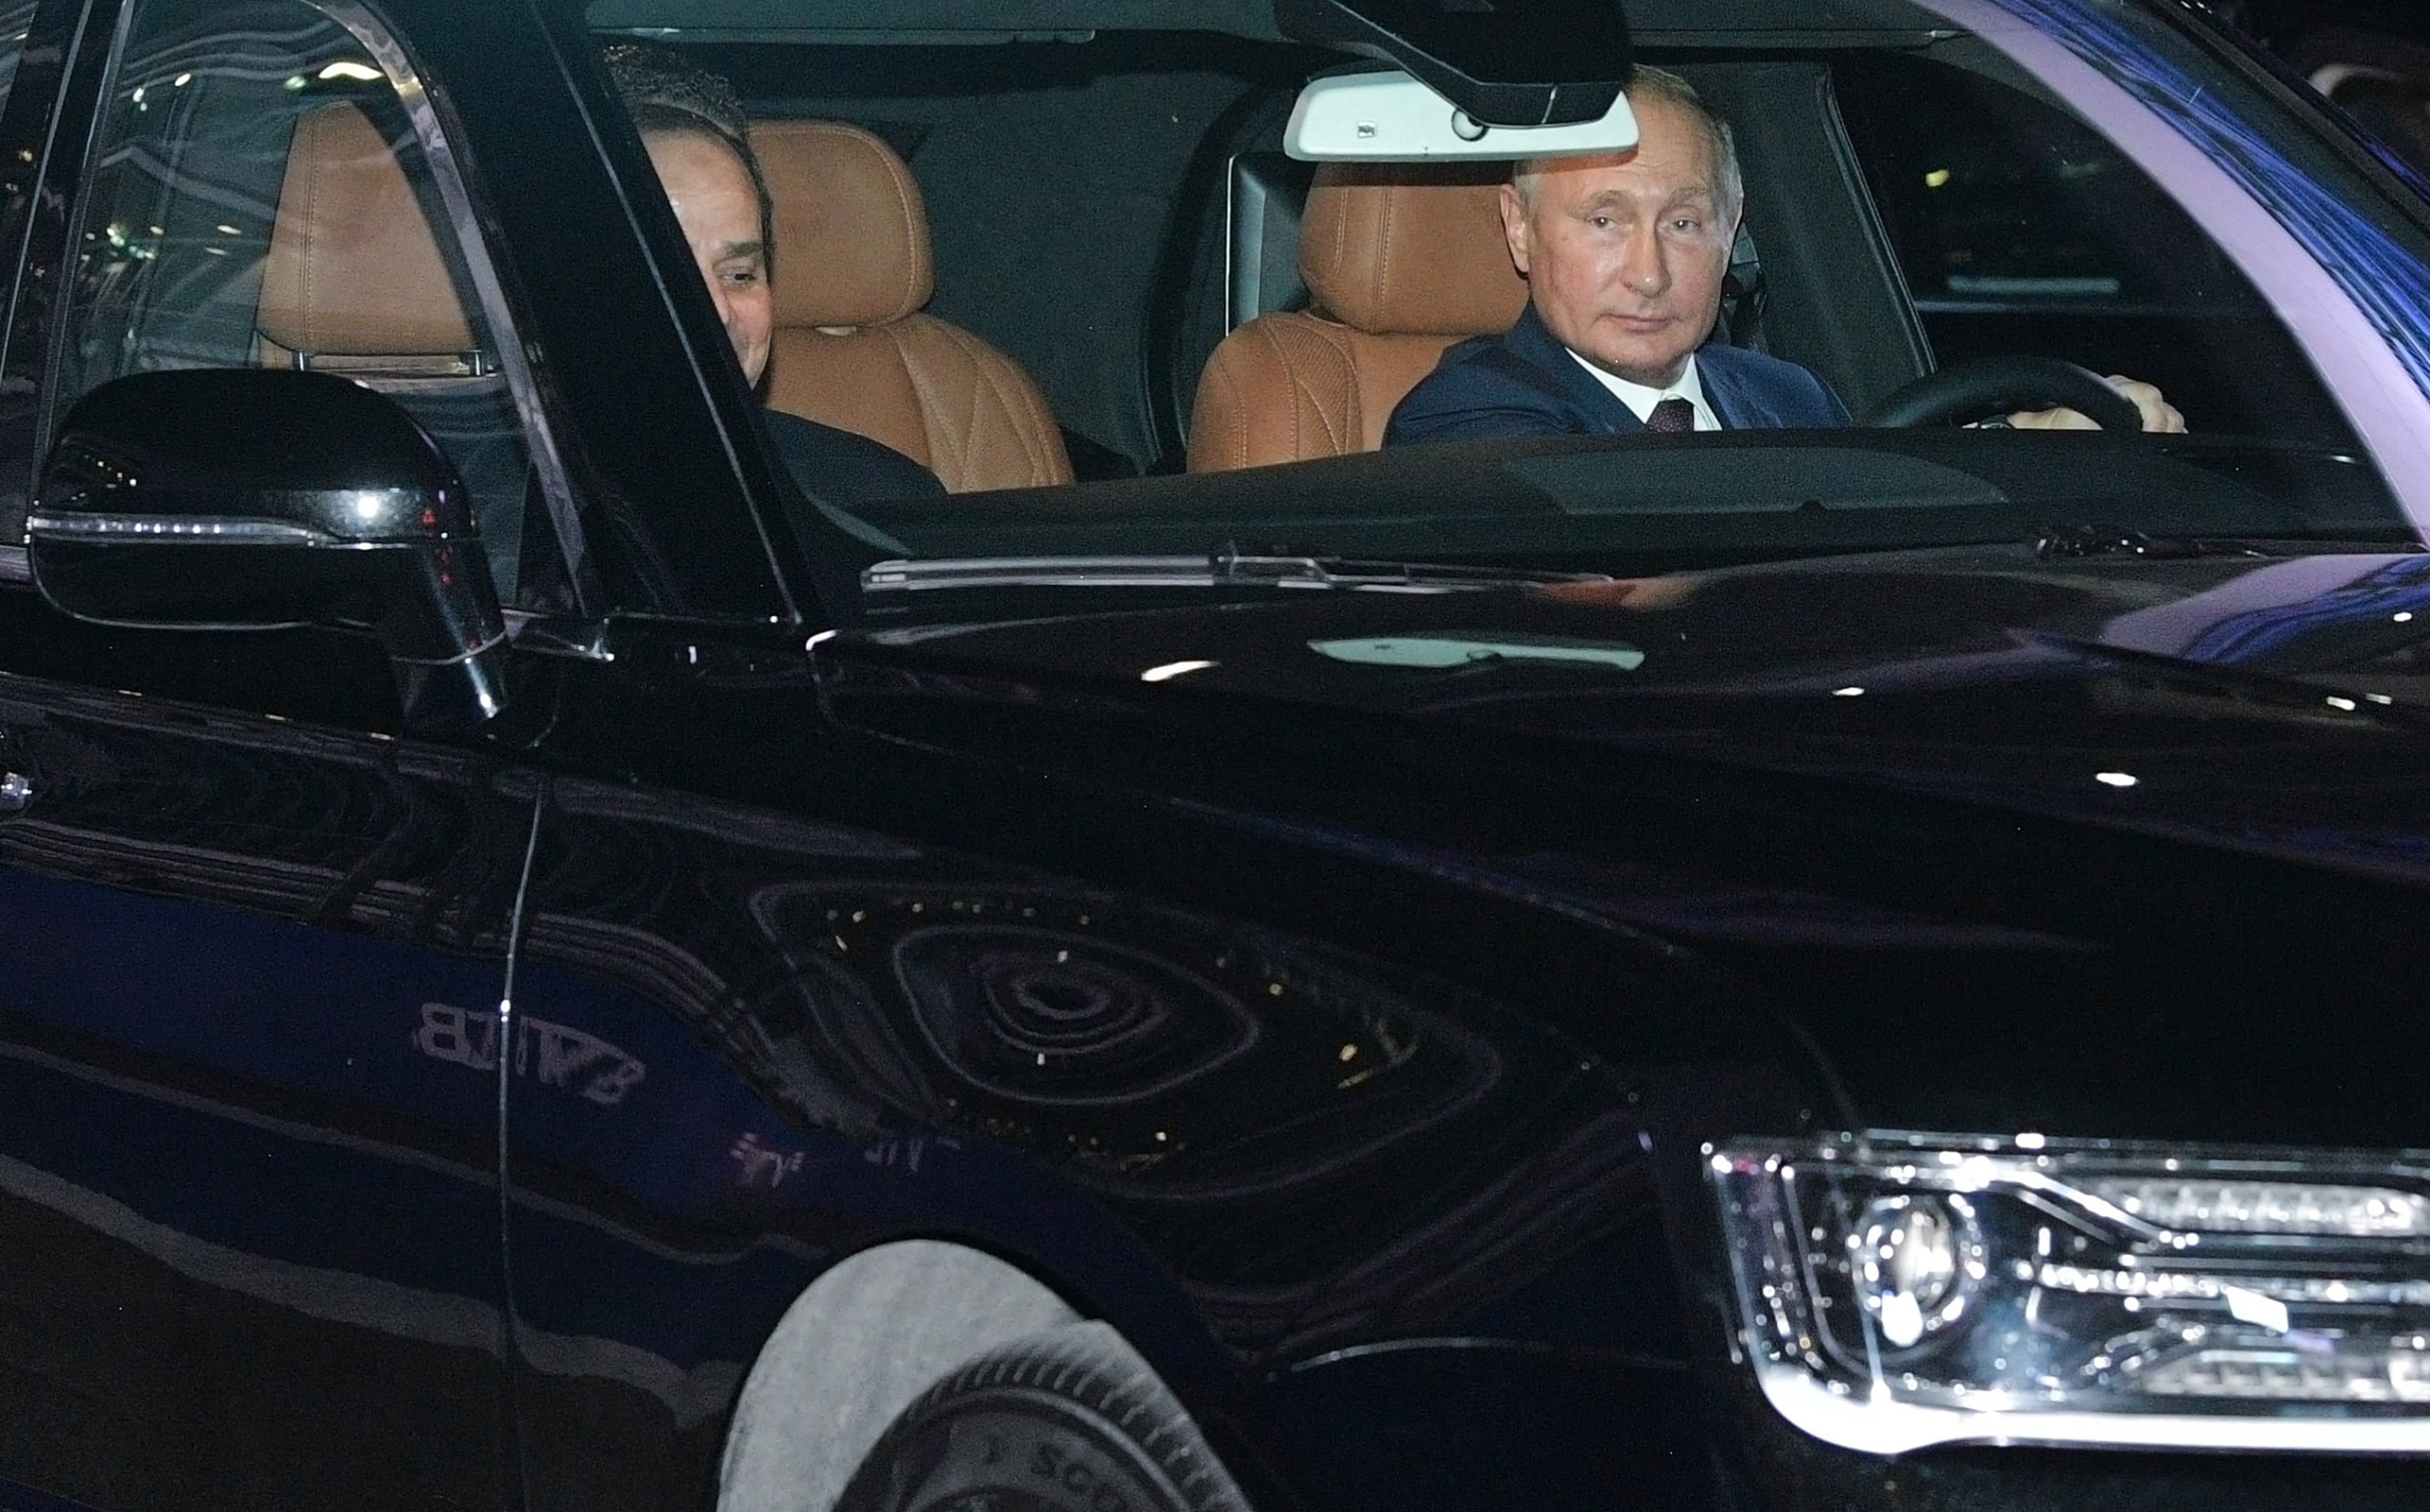 Russian President Vladimir Putin (R) drives the Aurus presidential limousine as Egyptian President Abdel Fattah el-Sisi (L) sits next to him at the Sochi's F1 race track on October 17, 2018. ALEXEI DRUZHININ/AFP via Getty Images